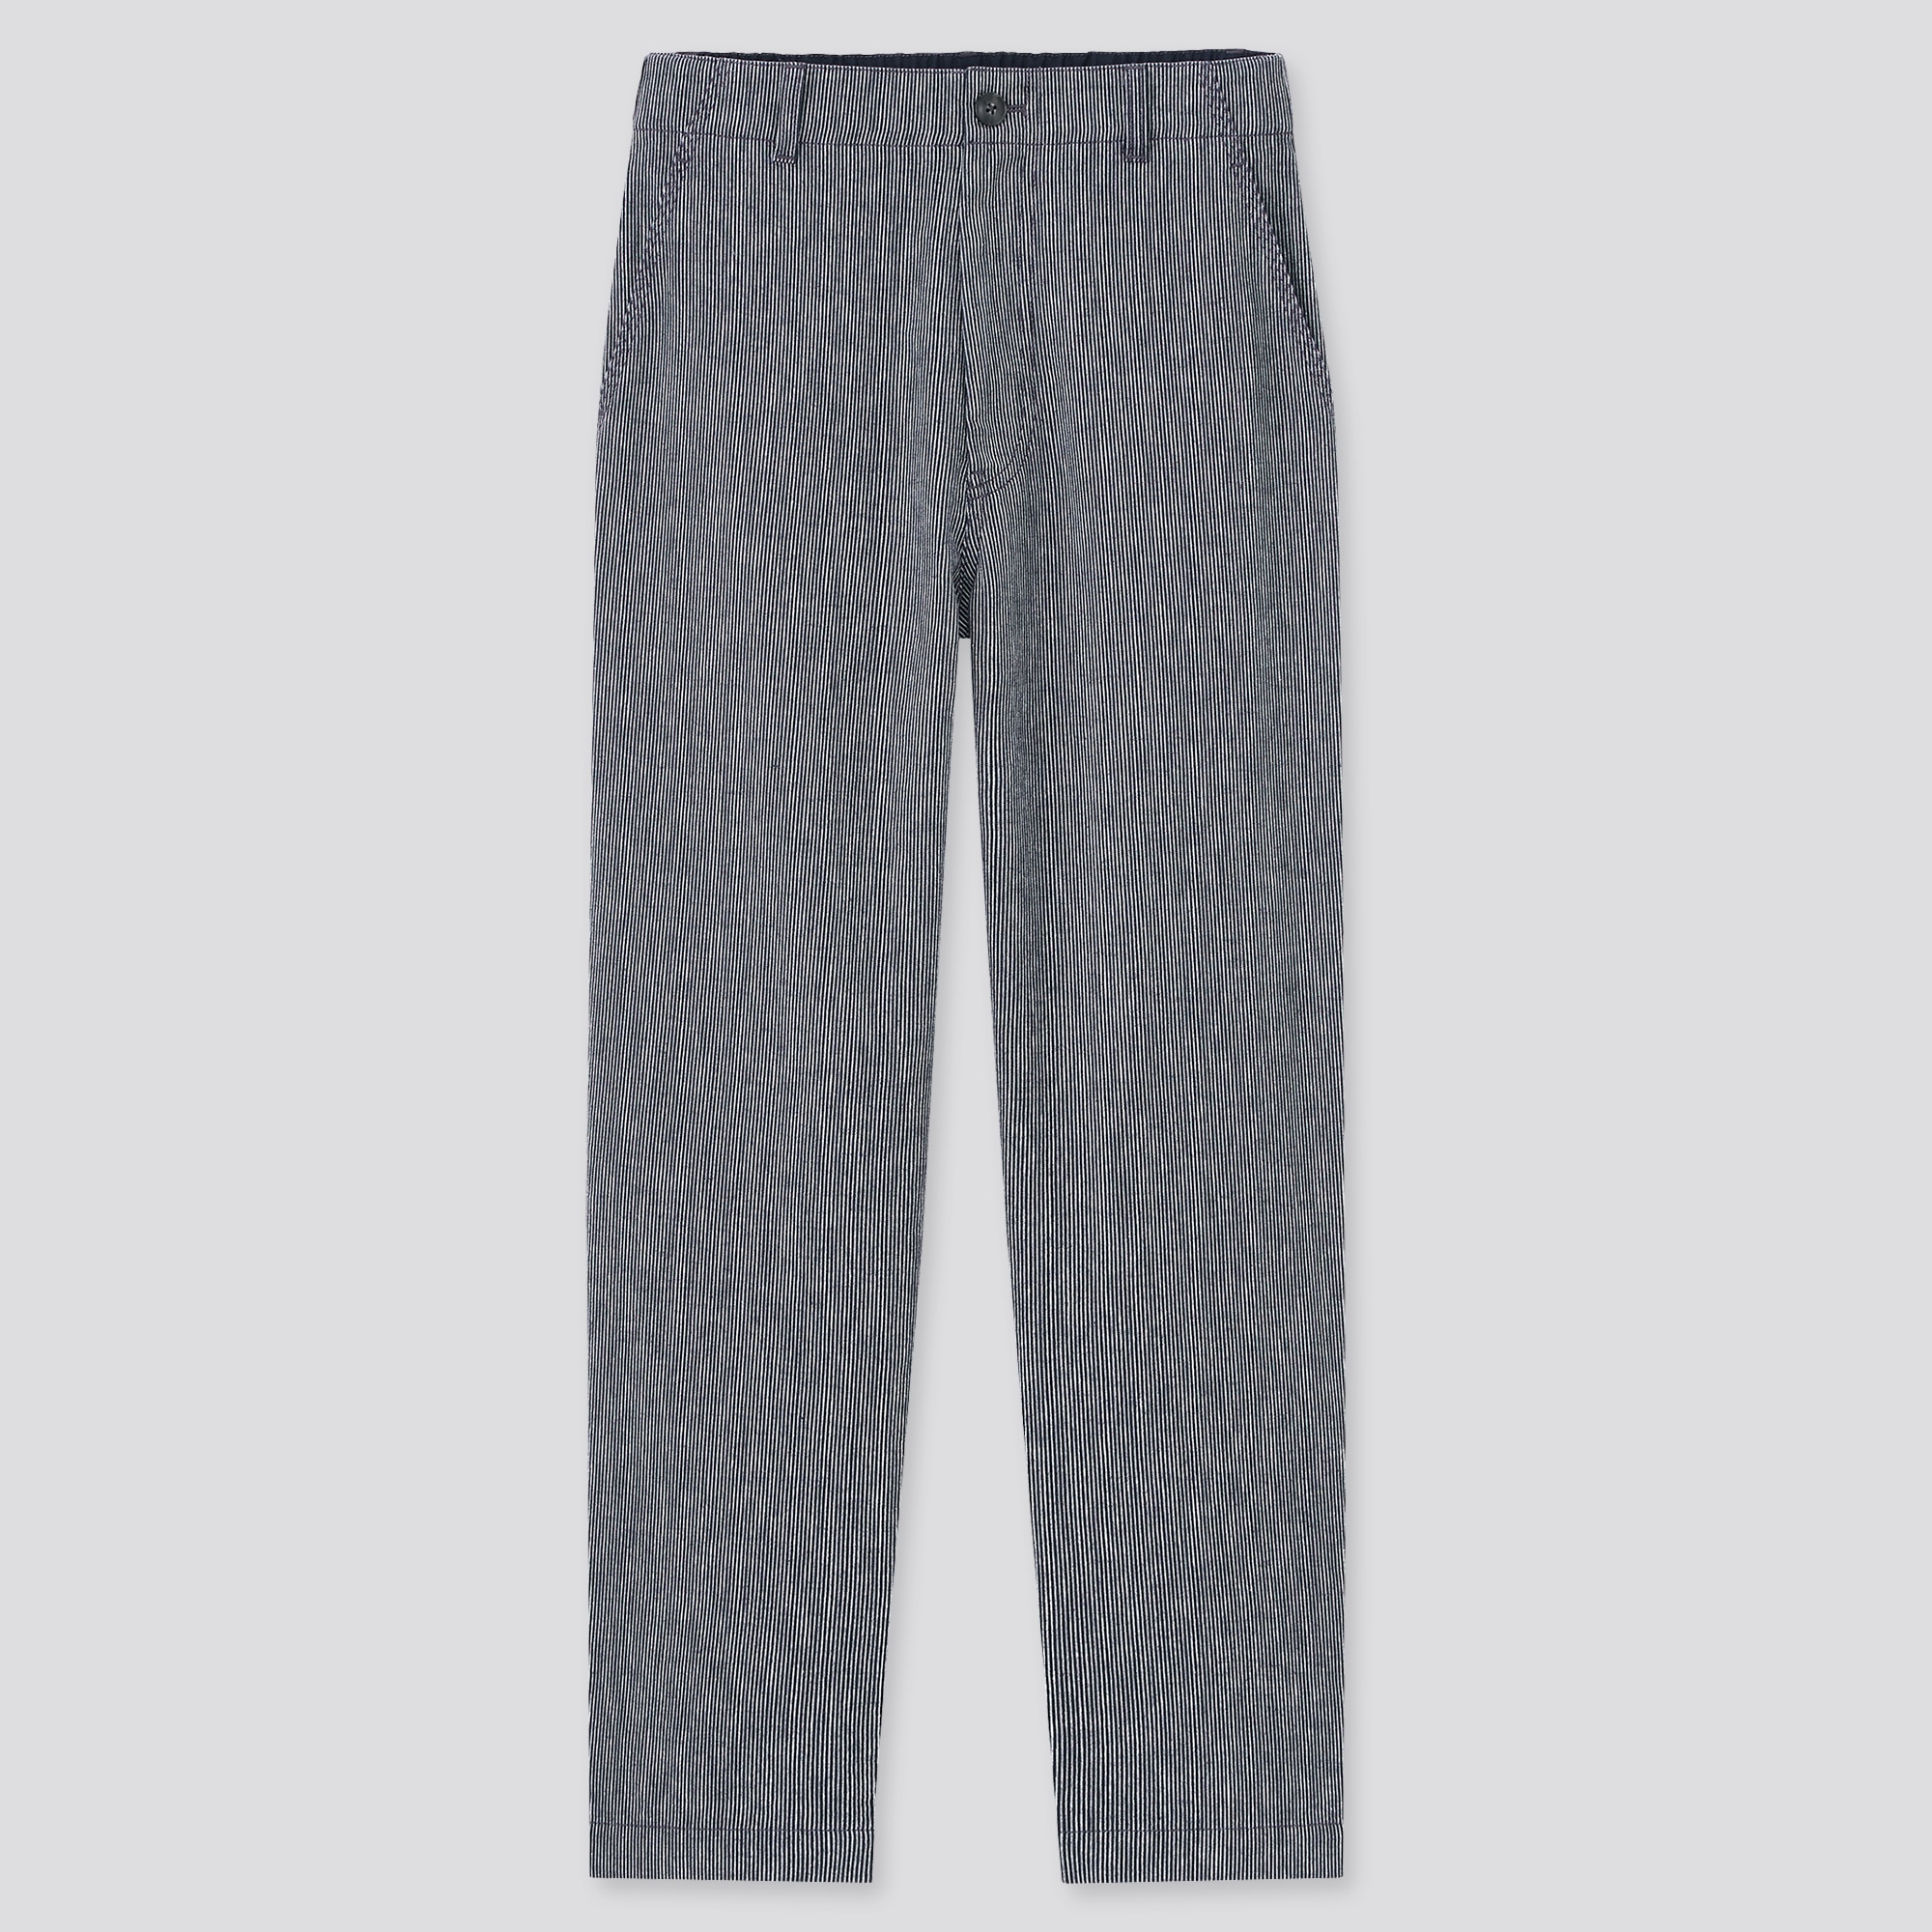 Check styling ideas for「Linen Cotton Tapered Pants」